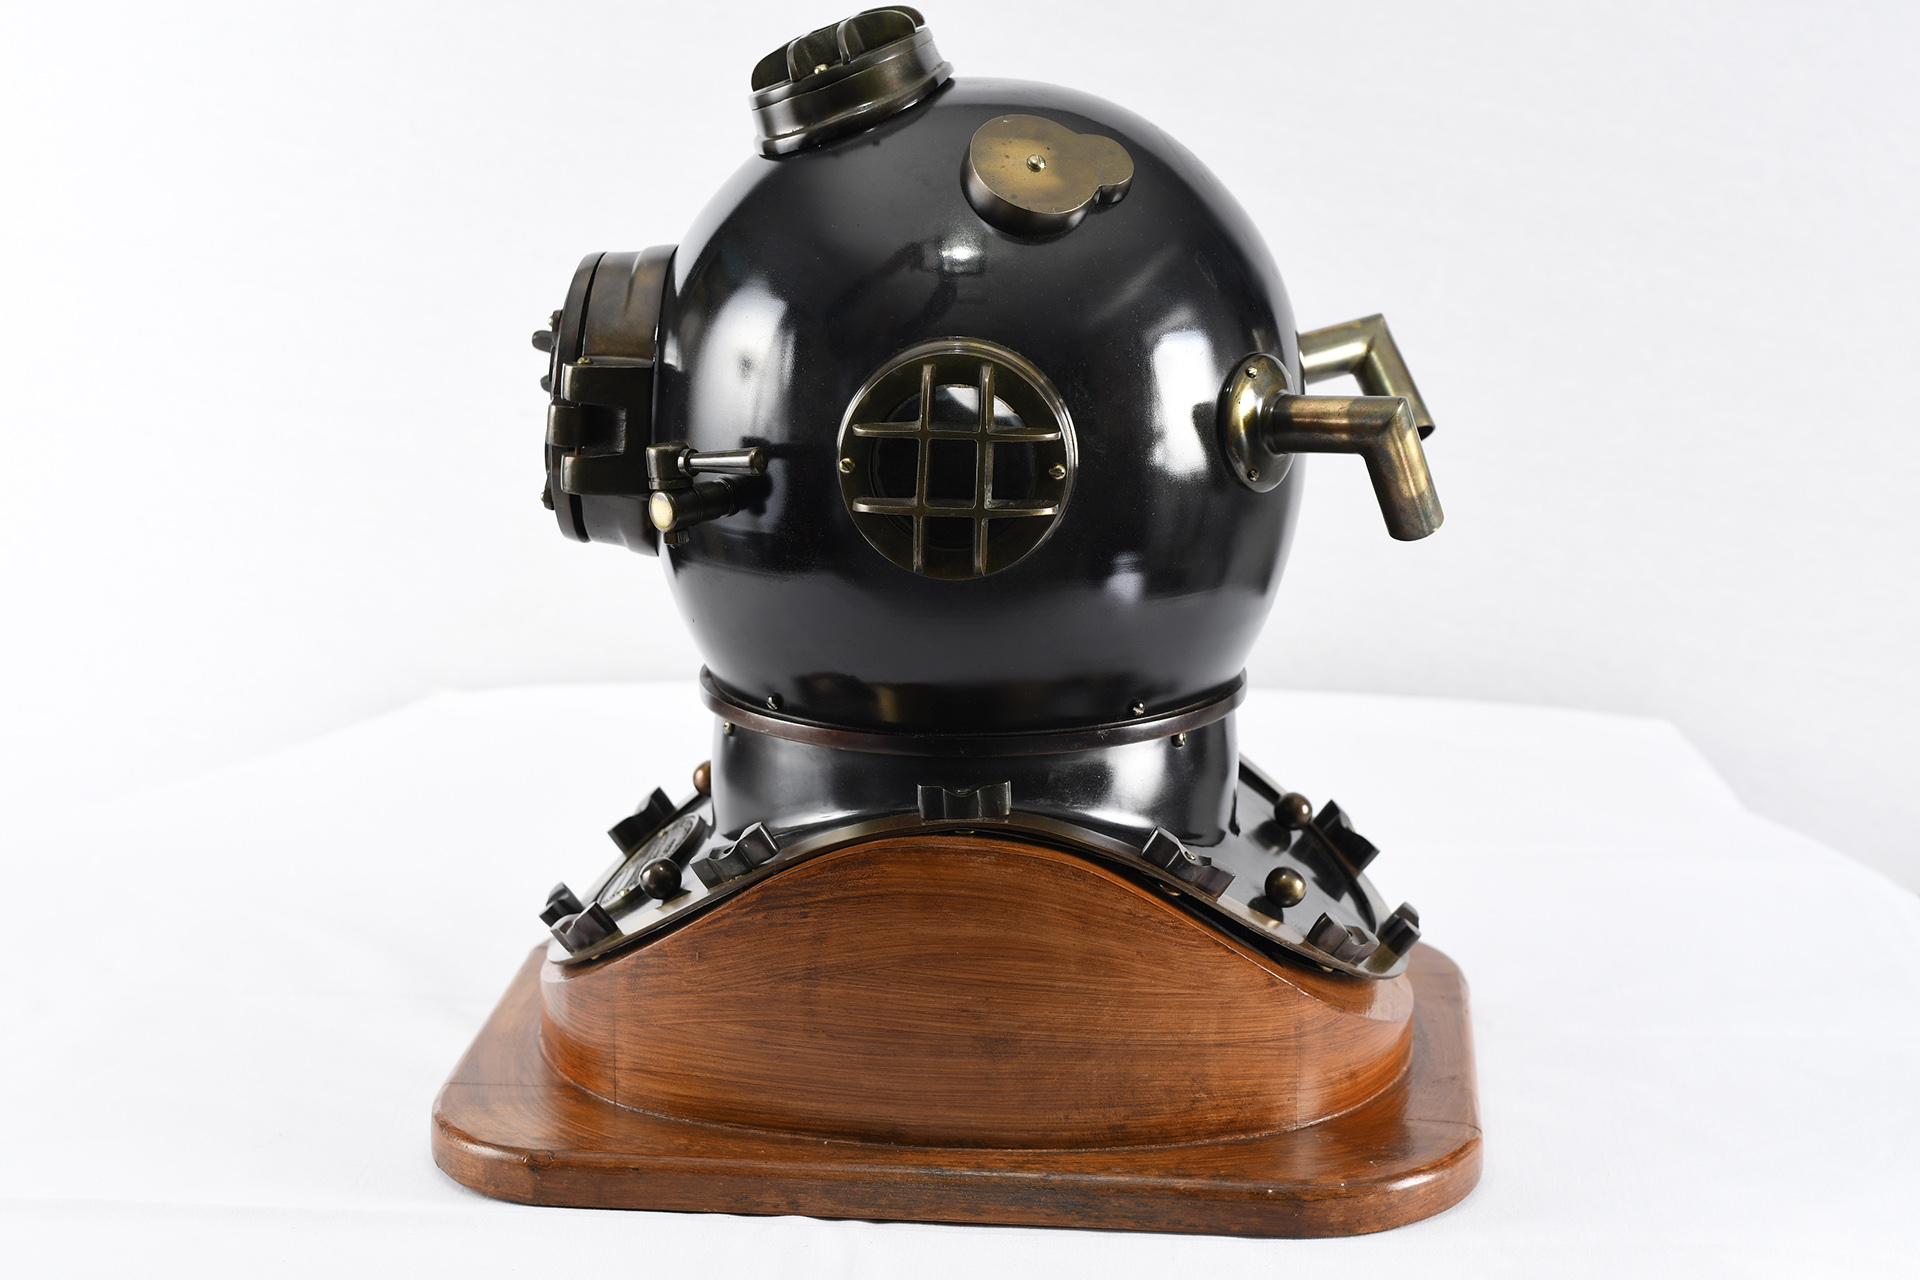 Large 20" Divers Helmet on Wood Base with Brass Fittings.